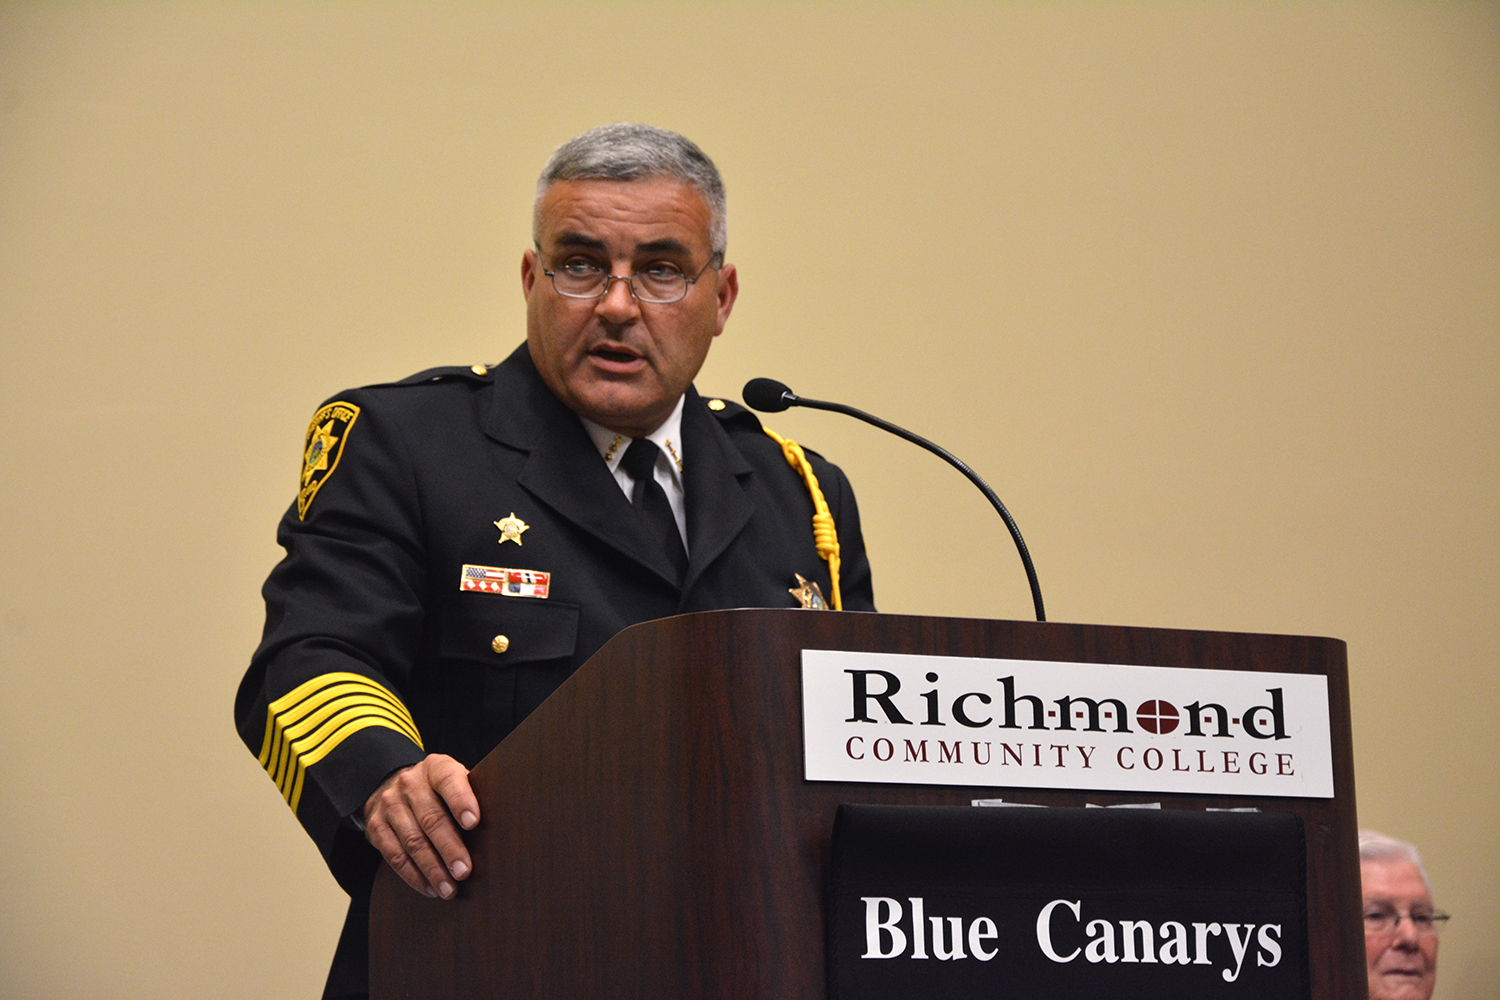 Scotland County Sheriff Ralph Kersey served as the guest speaker at Richmond Community College’s BLET graduation ceremony.